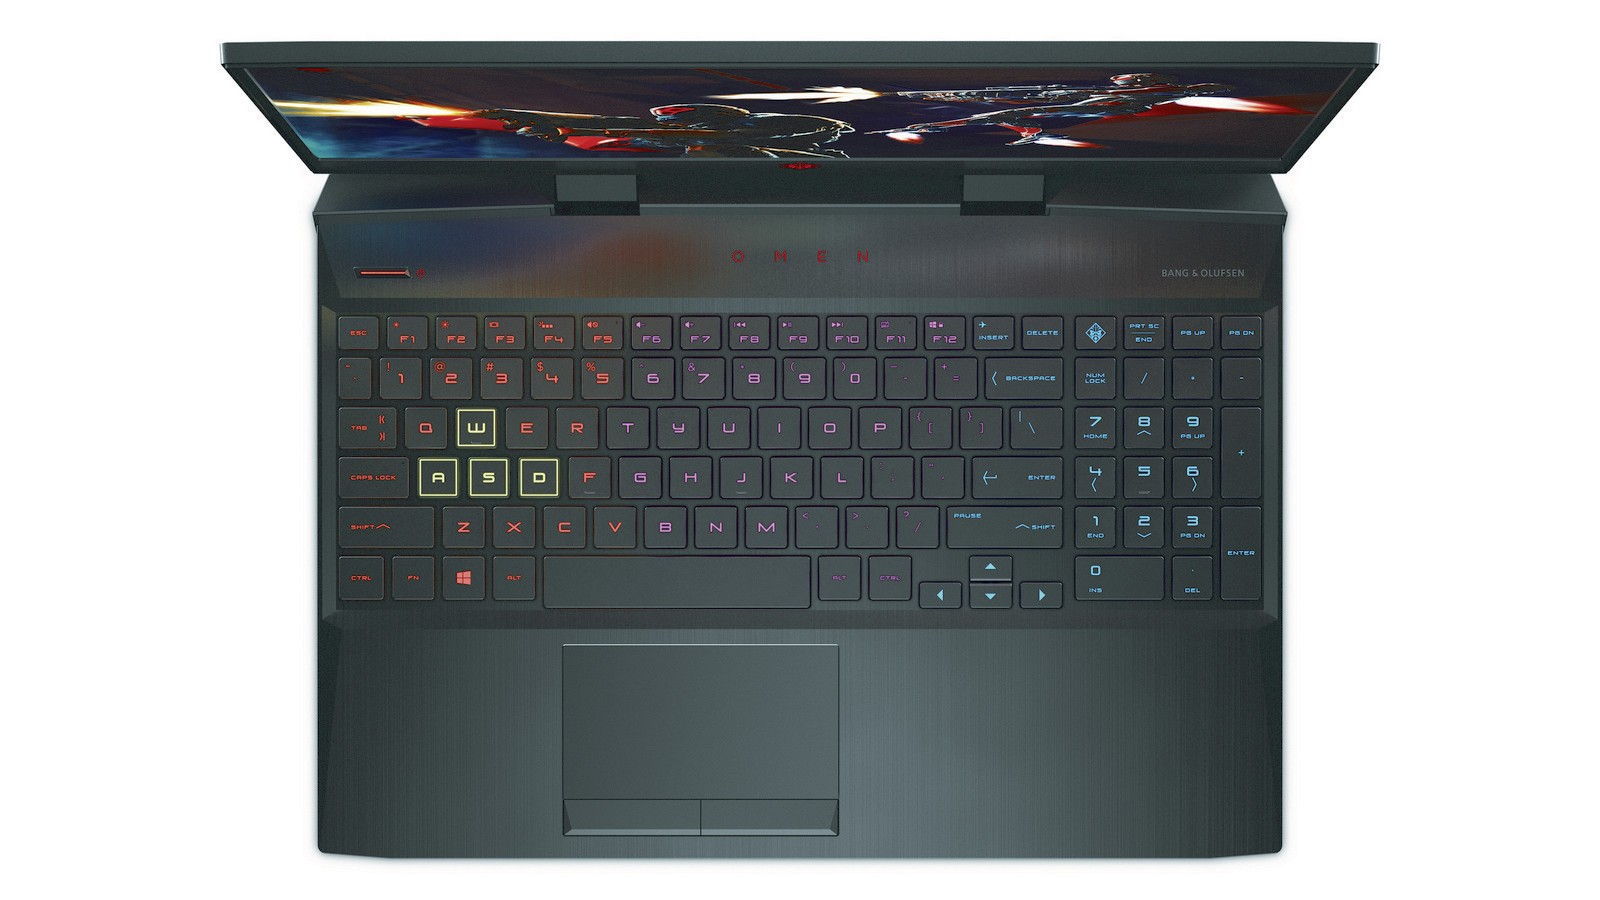 HP Omen 15 Gaming Laptop (2018) Launched with Major Hardware Upgrades